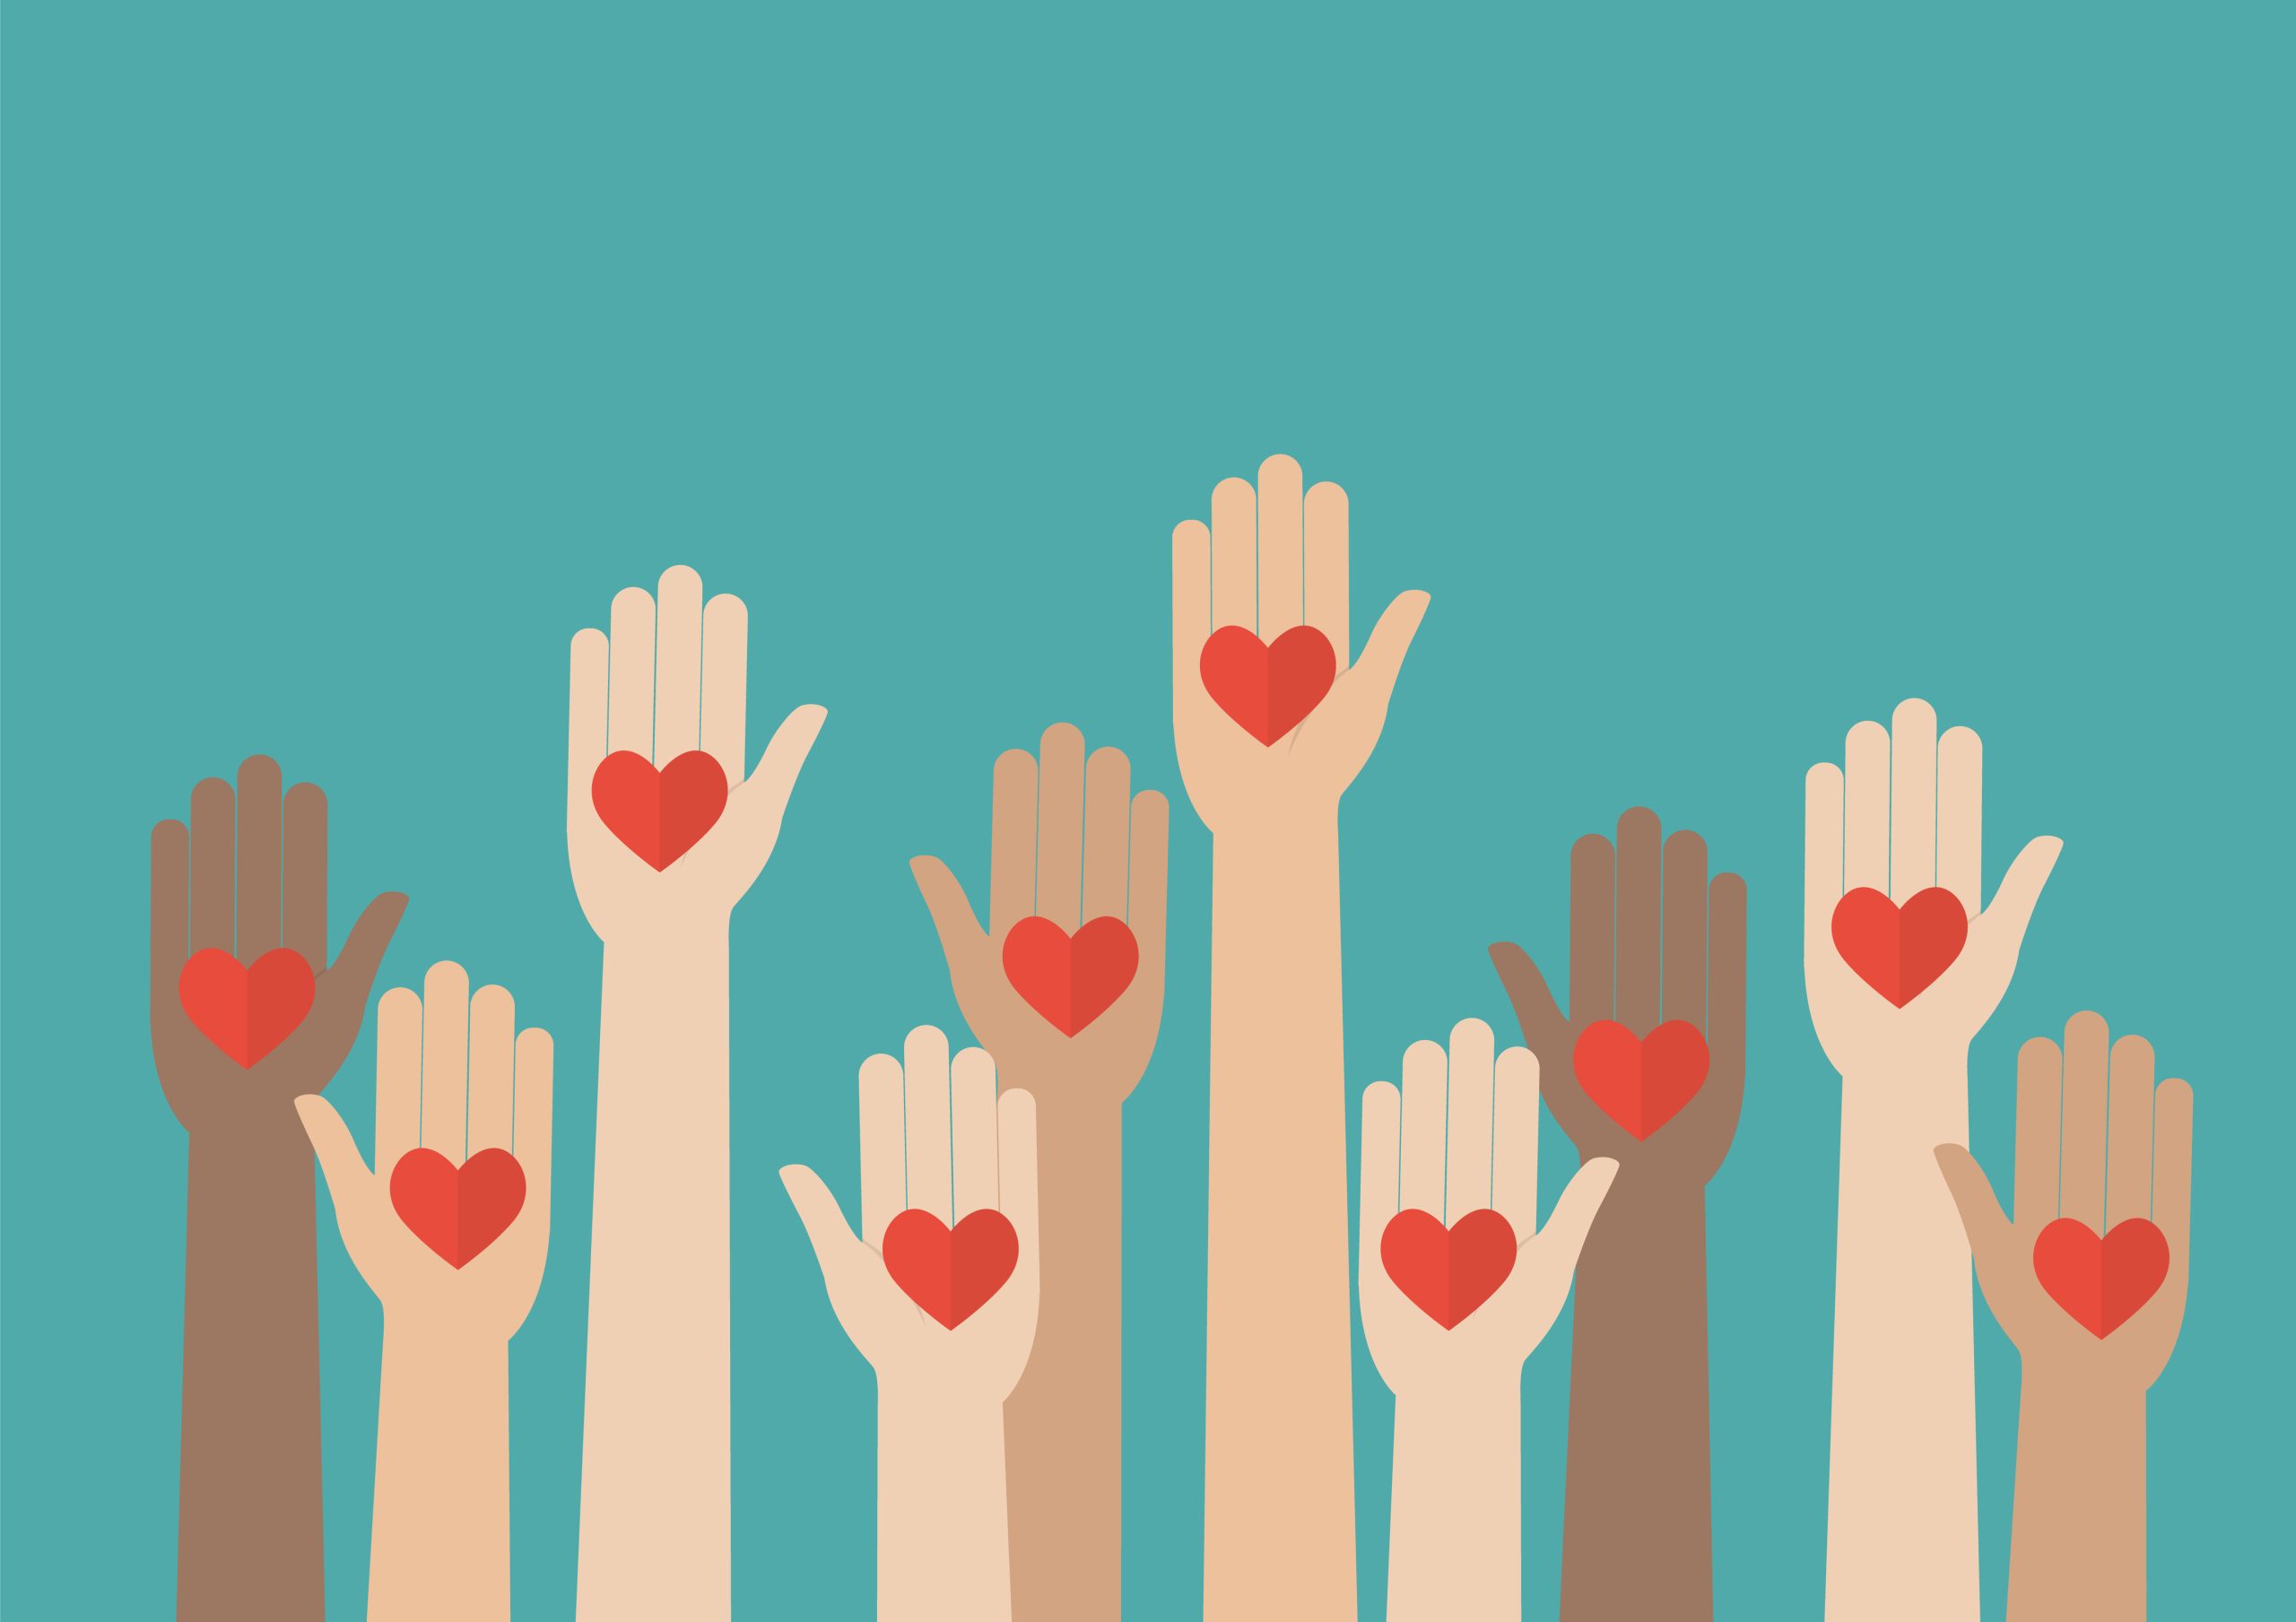 illustration of raised hands with hearts for volunteering